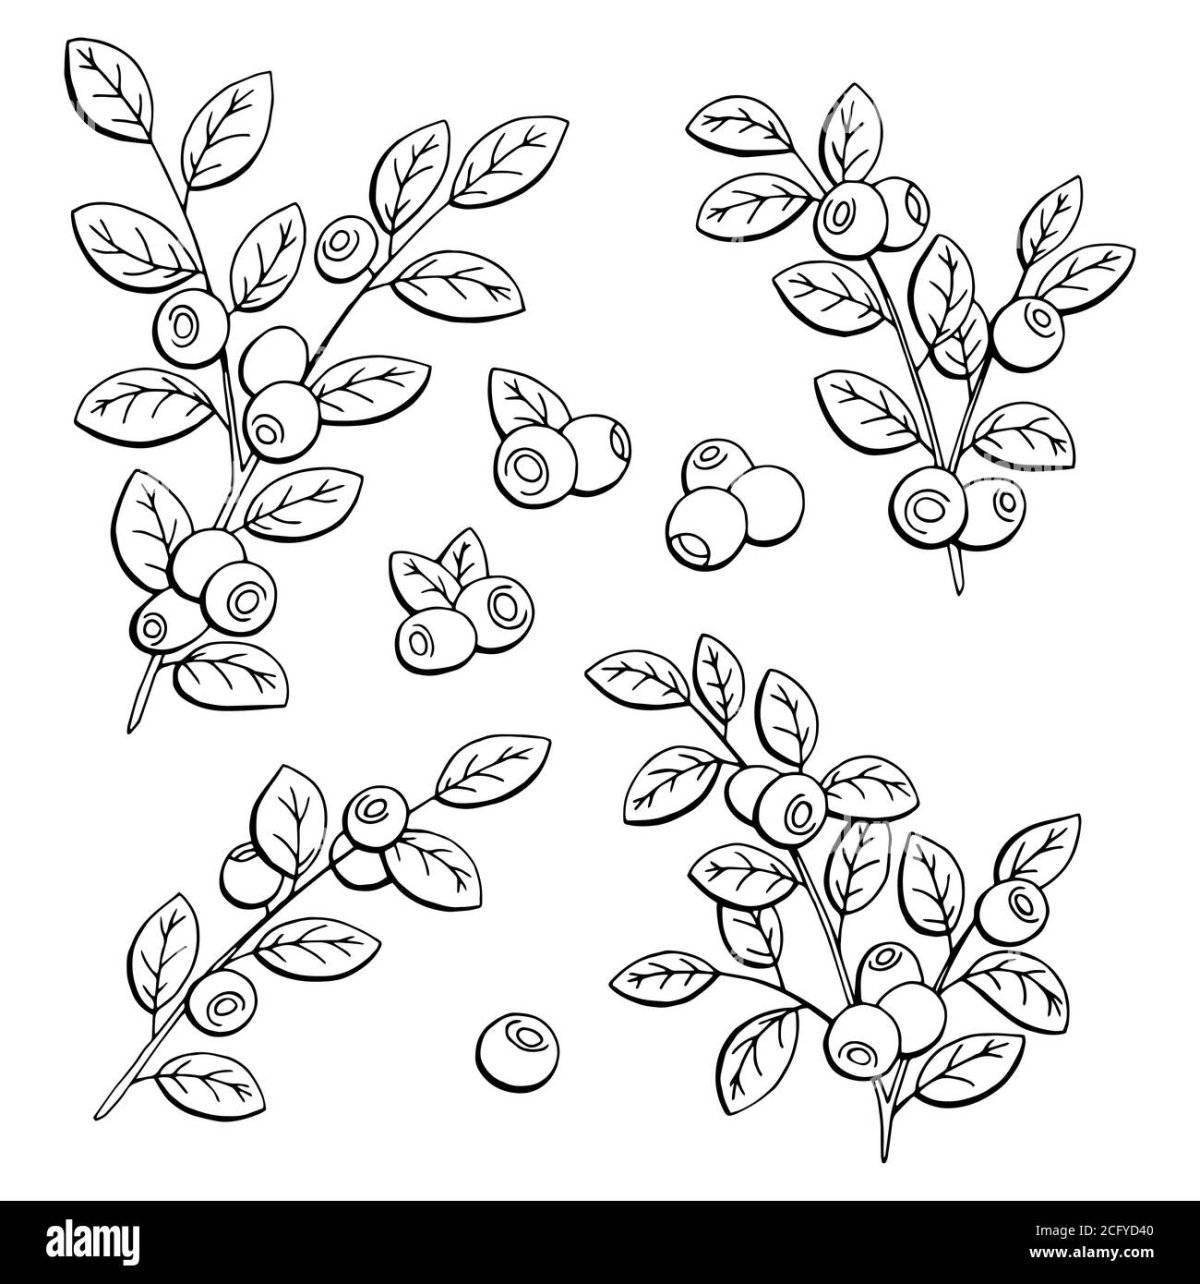 Color-frenzy cranberry coloring page for kids